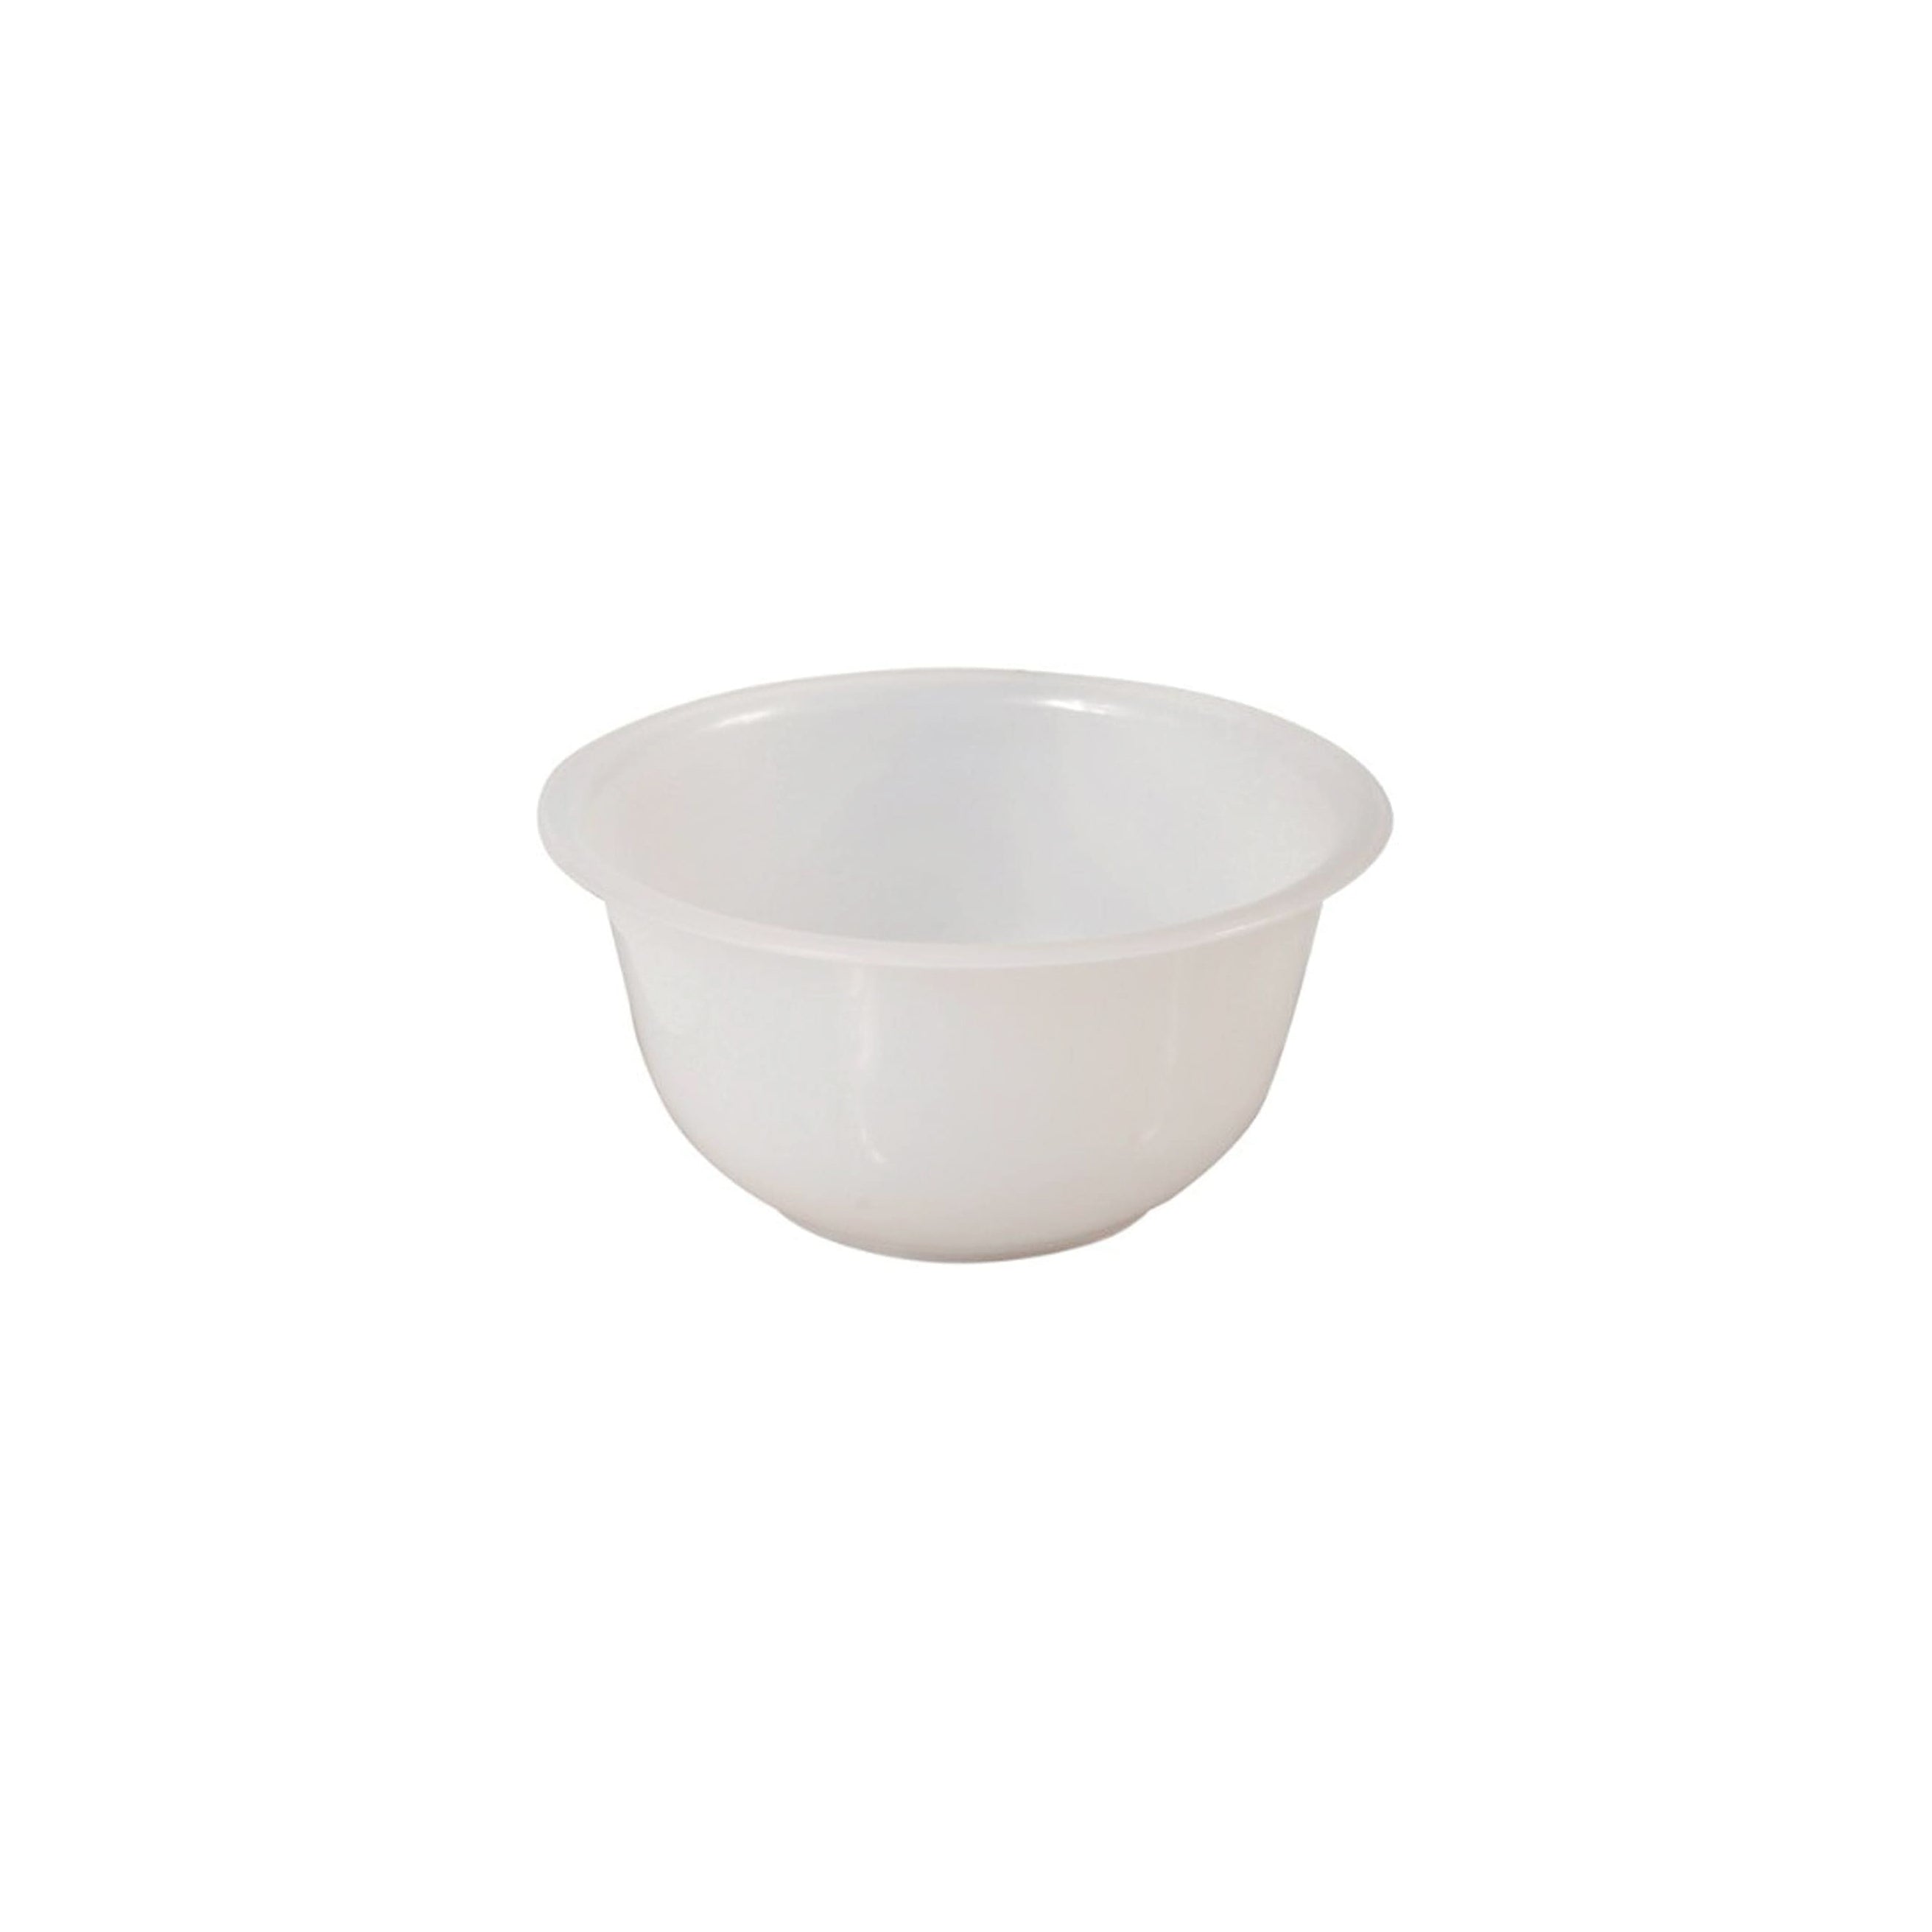 Mixing Bowls with Lids, 4-Piece | Mangelsen's